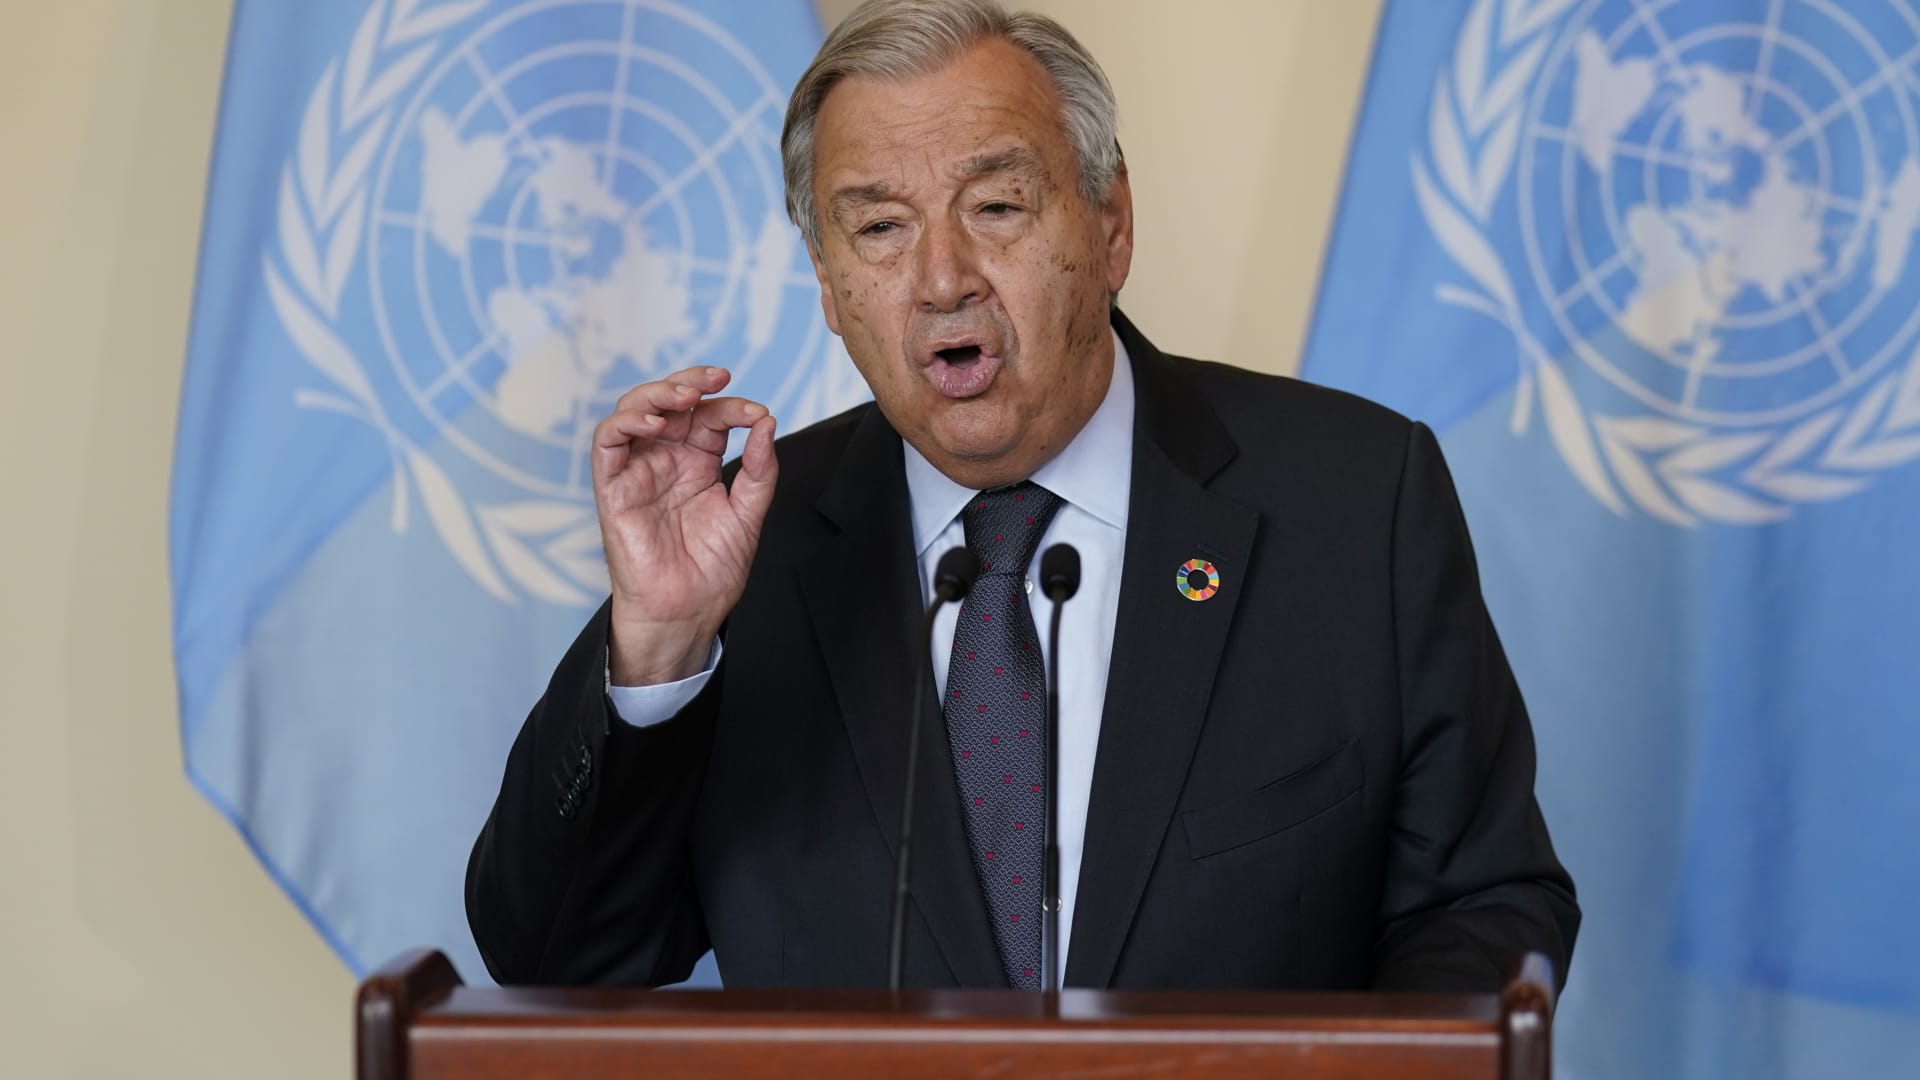 UN’s Guterres says ‘polluters must pay’, calls for tax on fossil fuels